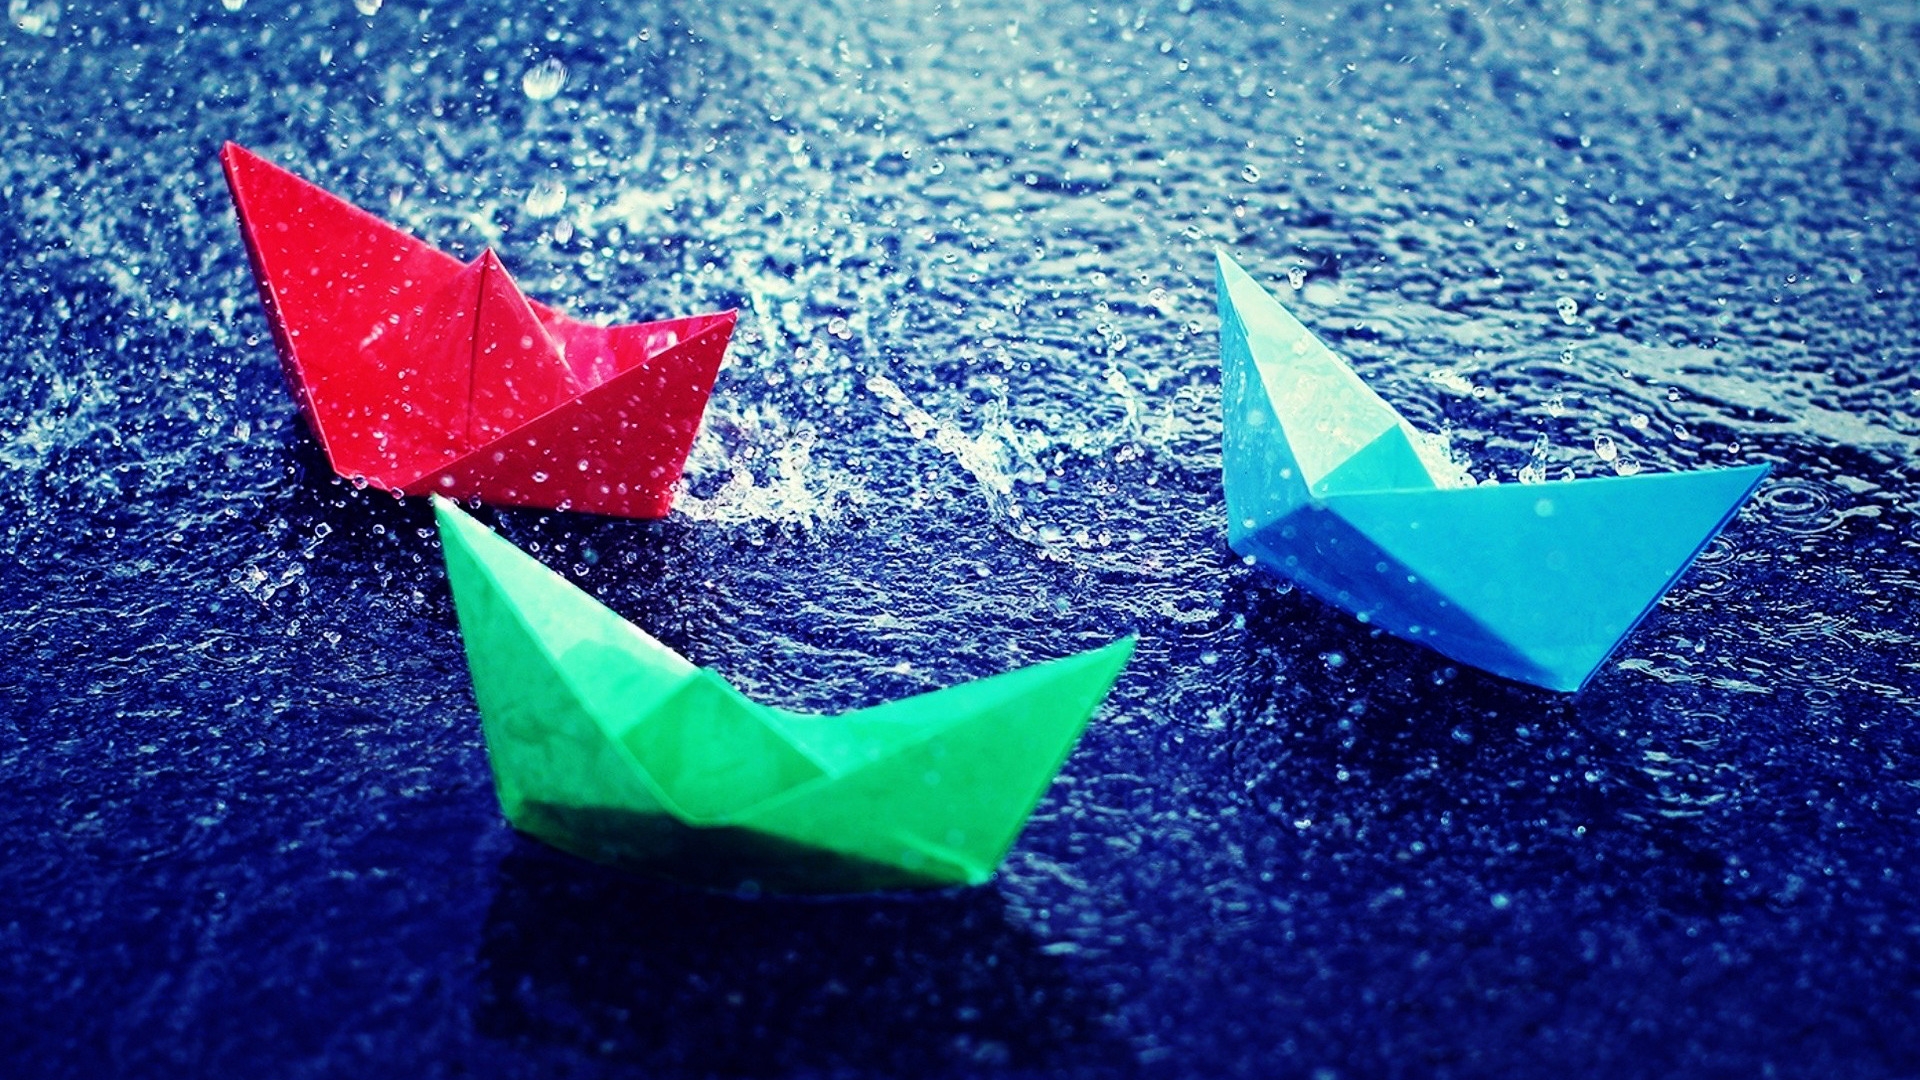 Paper Boats for 1920 x 1080 HDTV 1080p resolution